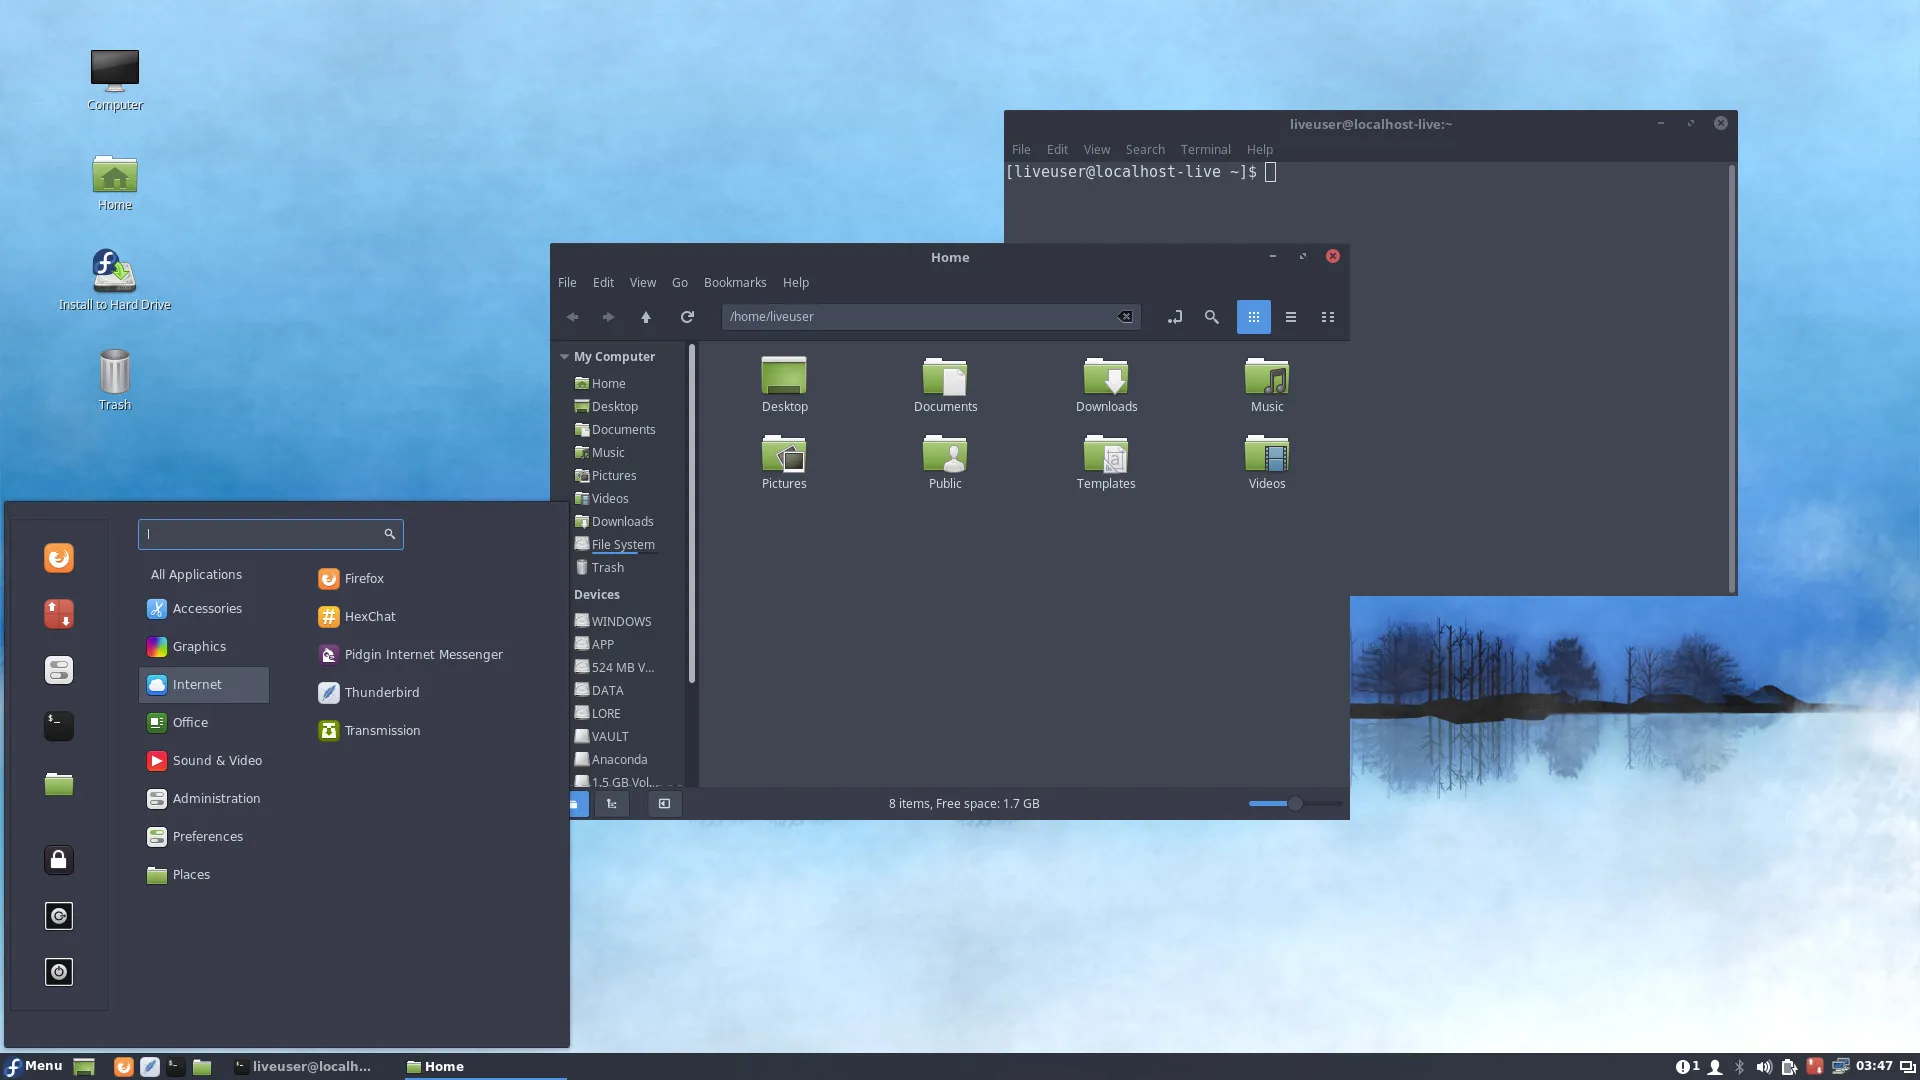 7 Best Linux distributions for home users